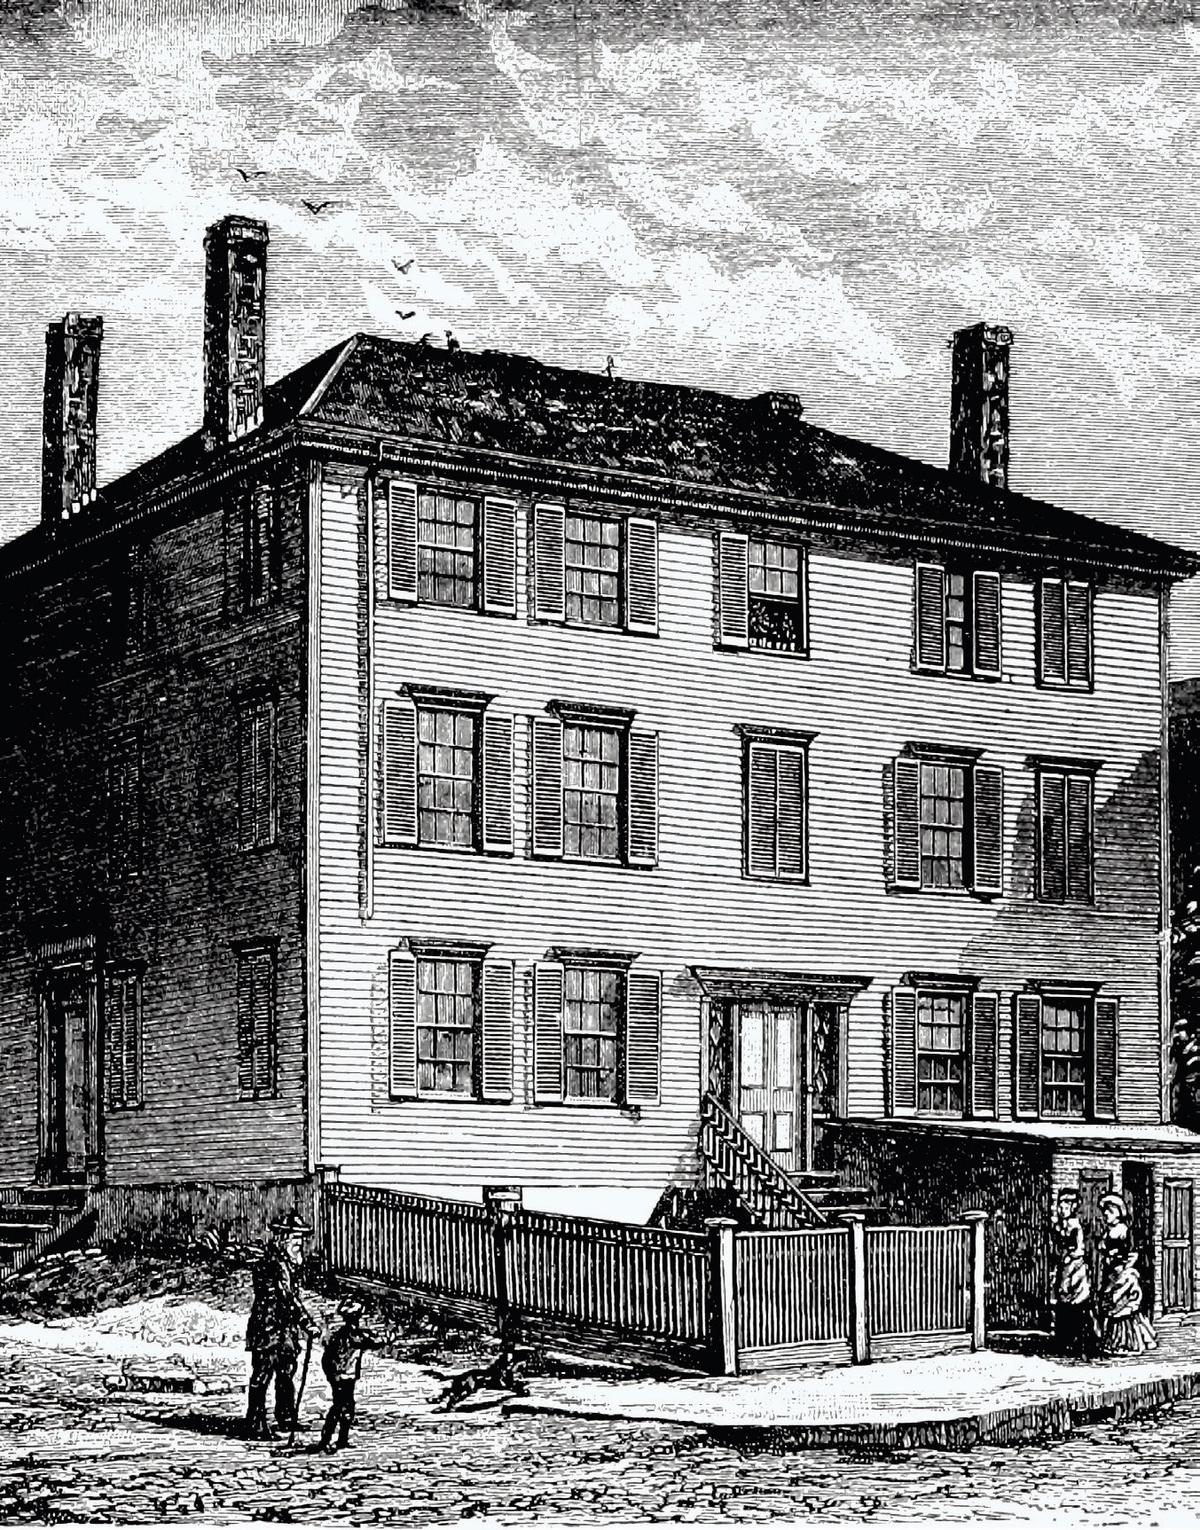  Longfellow’s birthplace, located on the corner of Hancock and Fore streets in Portland, Maine, was demolished in 1955. (Public domain)